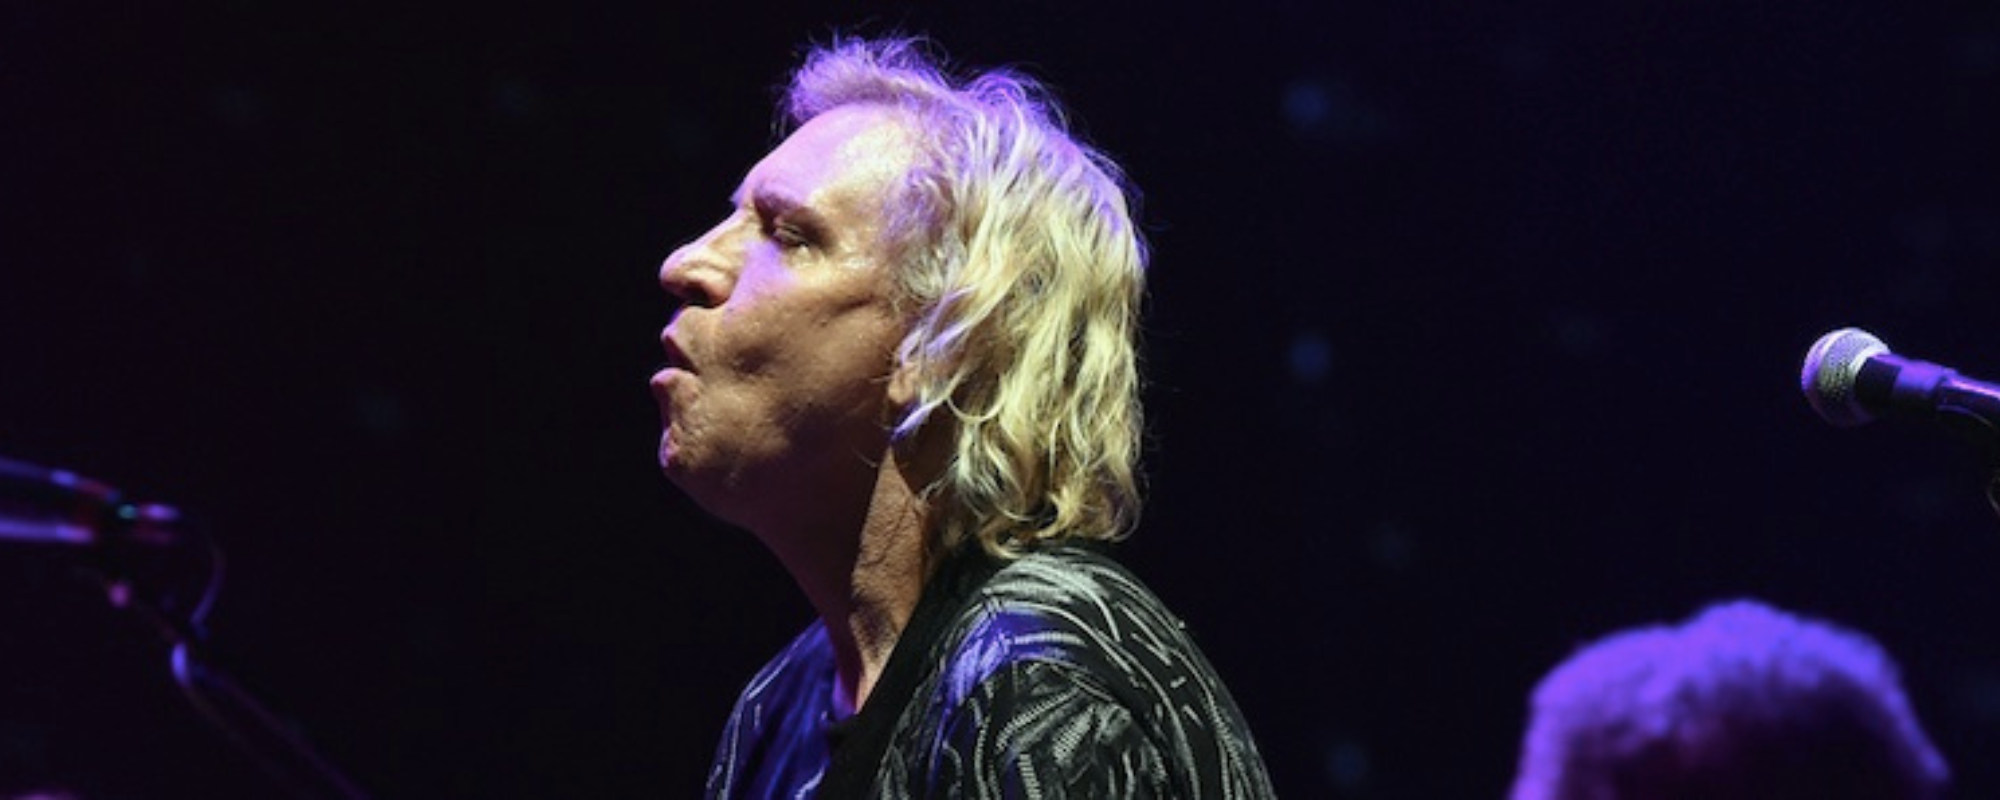 How to Watch: Eagles Guitarist Joe Walsh’s Star-Studded 2023 VetsAid Benefit Concert